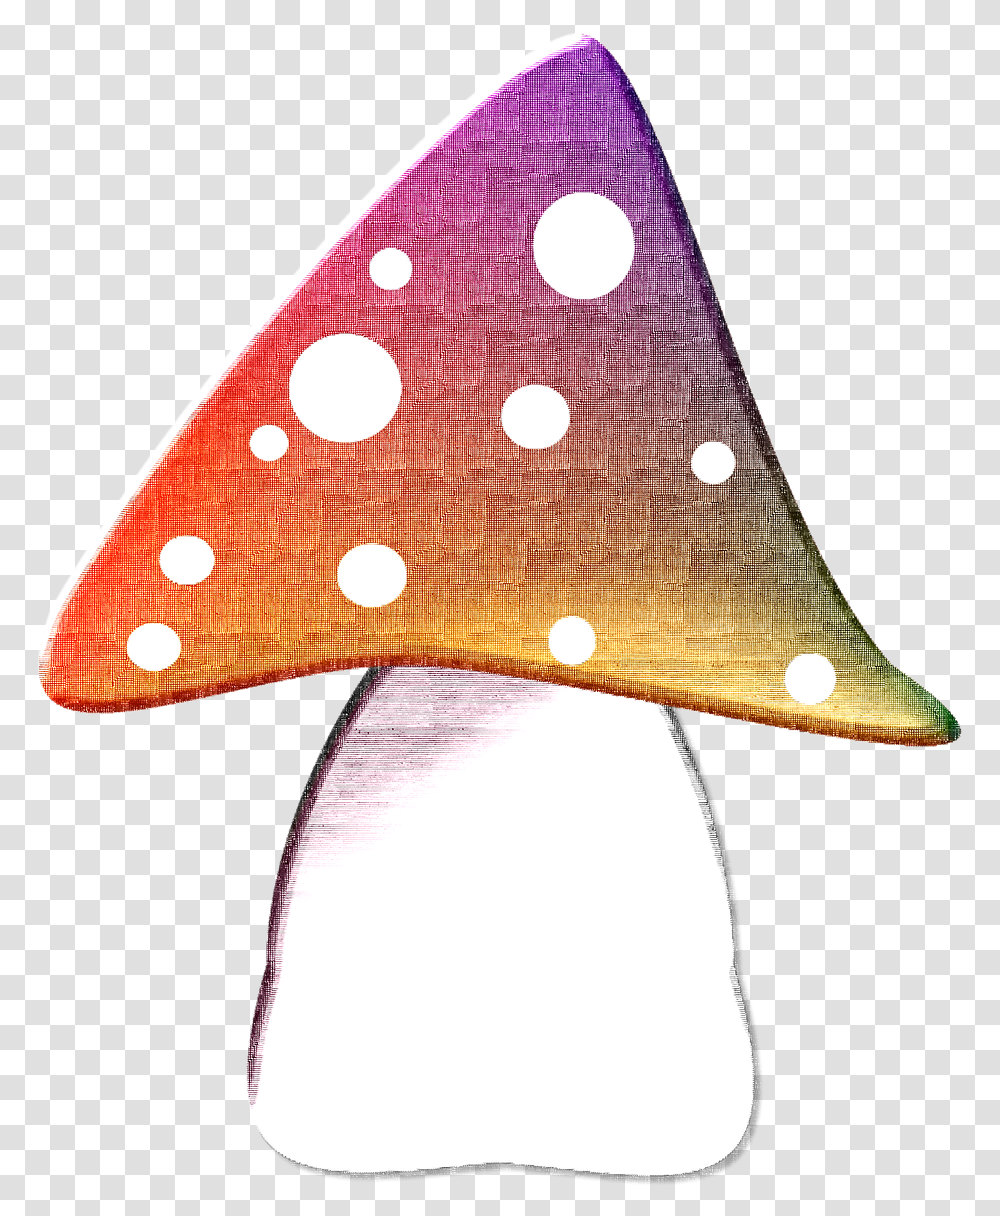 Mushroom Nature Forest Free Photo Illustration, Lamp, Lampshade, Triangle Transparent Png